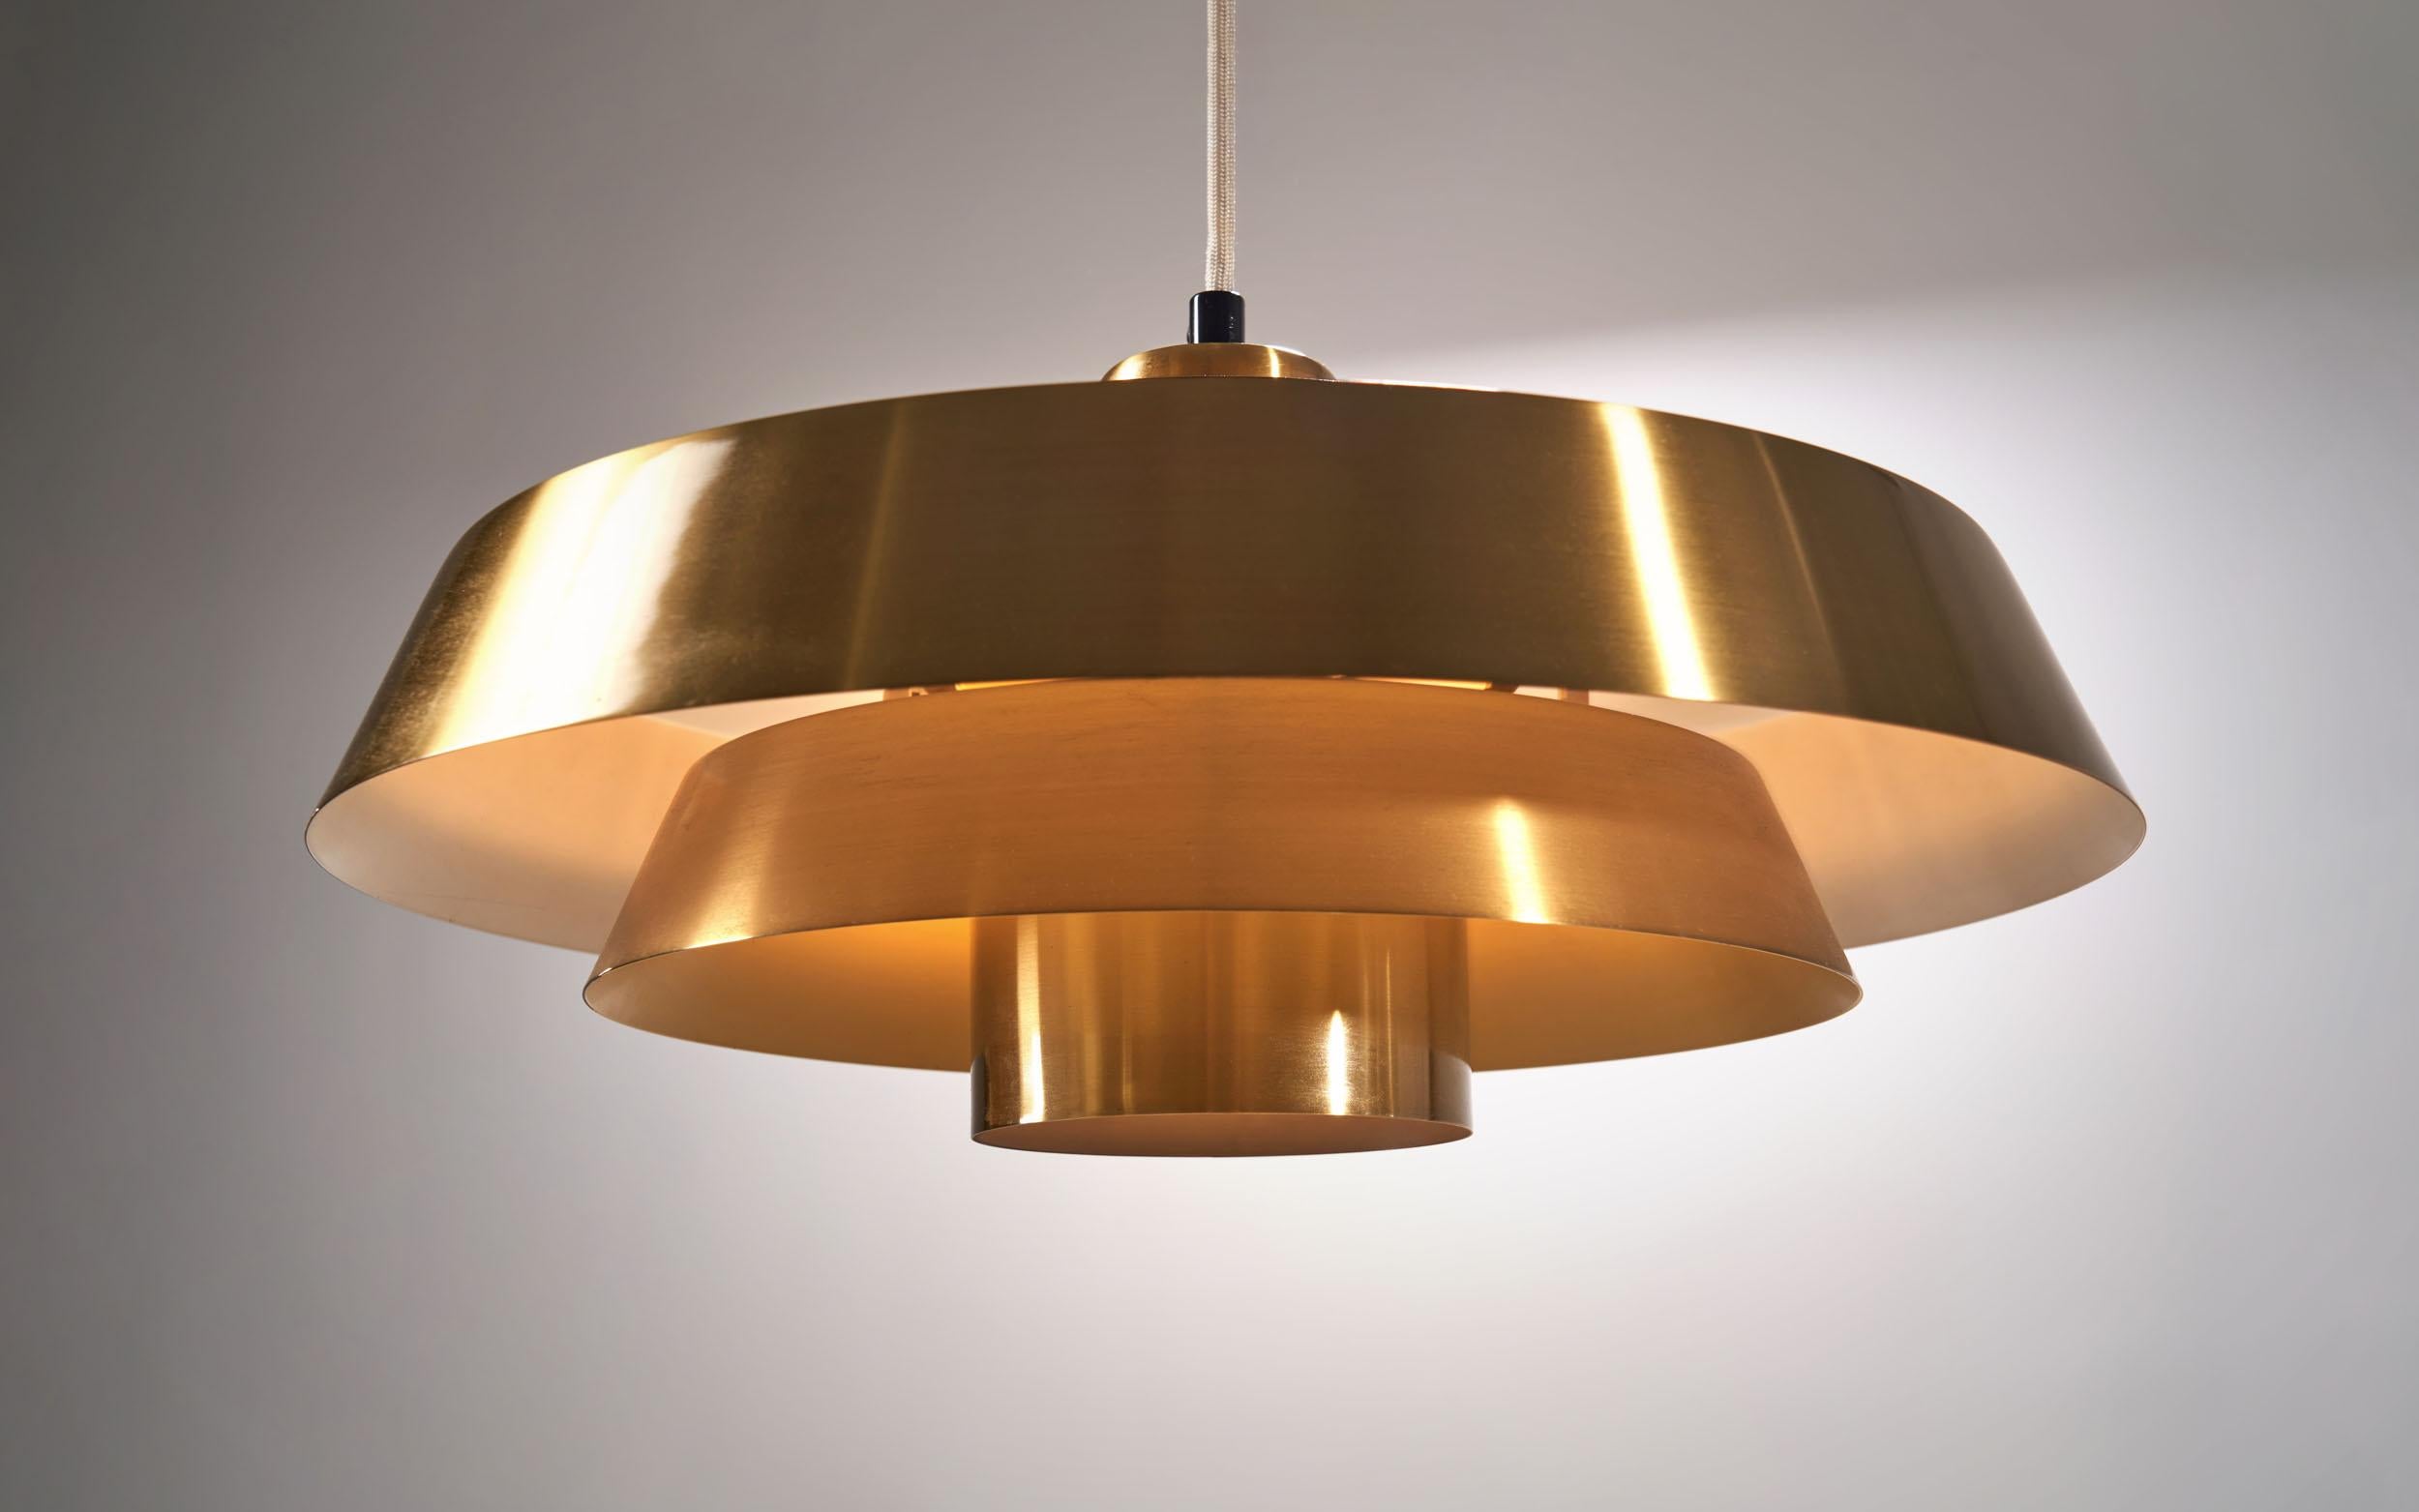 This famous Nova pendant by Danish designer Jo Hammerborg for the Danish lighting company Fog & Mørup is one of the most recognizable Danish lighting designs.

This lamp is made of solid brass with a beautiful yellow hue on the inside of the